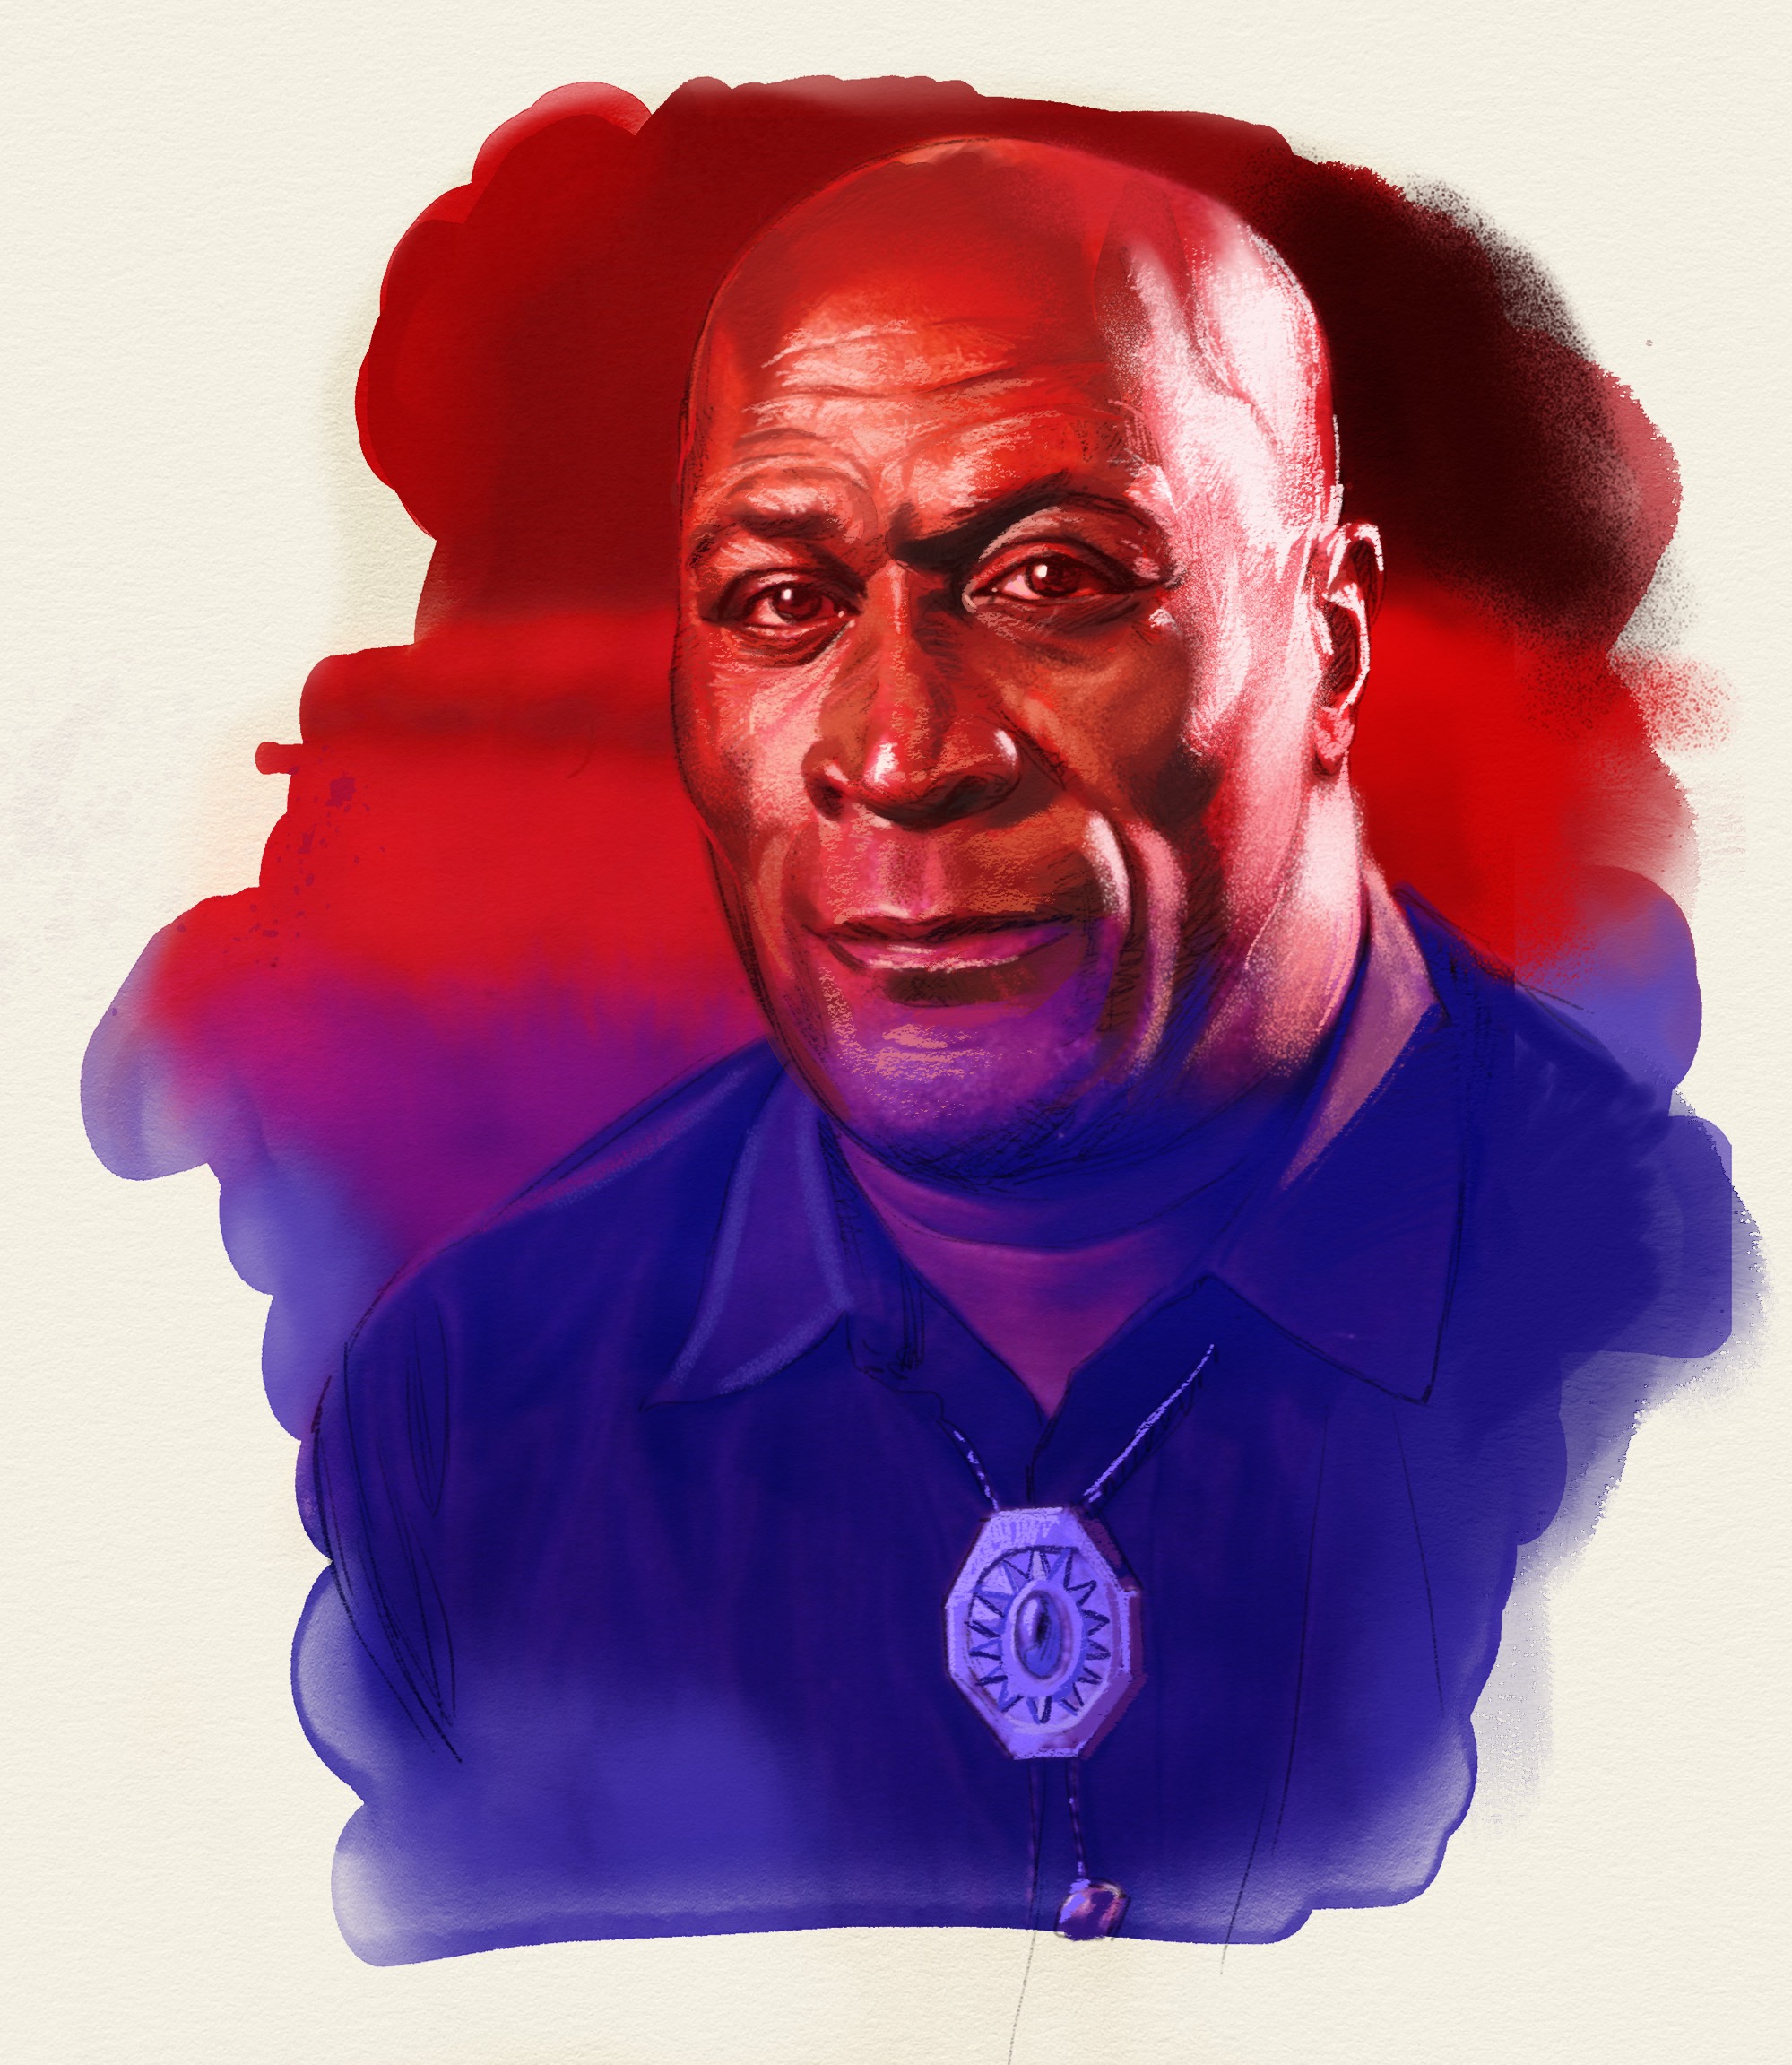 Portrait of actor John Amos . is an American actor known for his role as James Evans, Sr., on the CBS television series Good Times by Award Wining artist Mark Evans